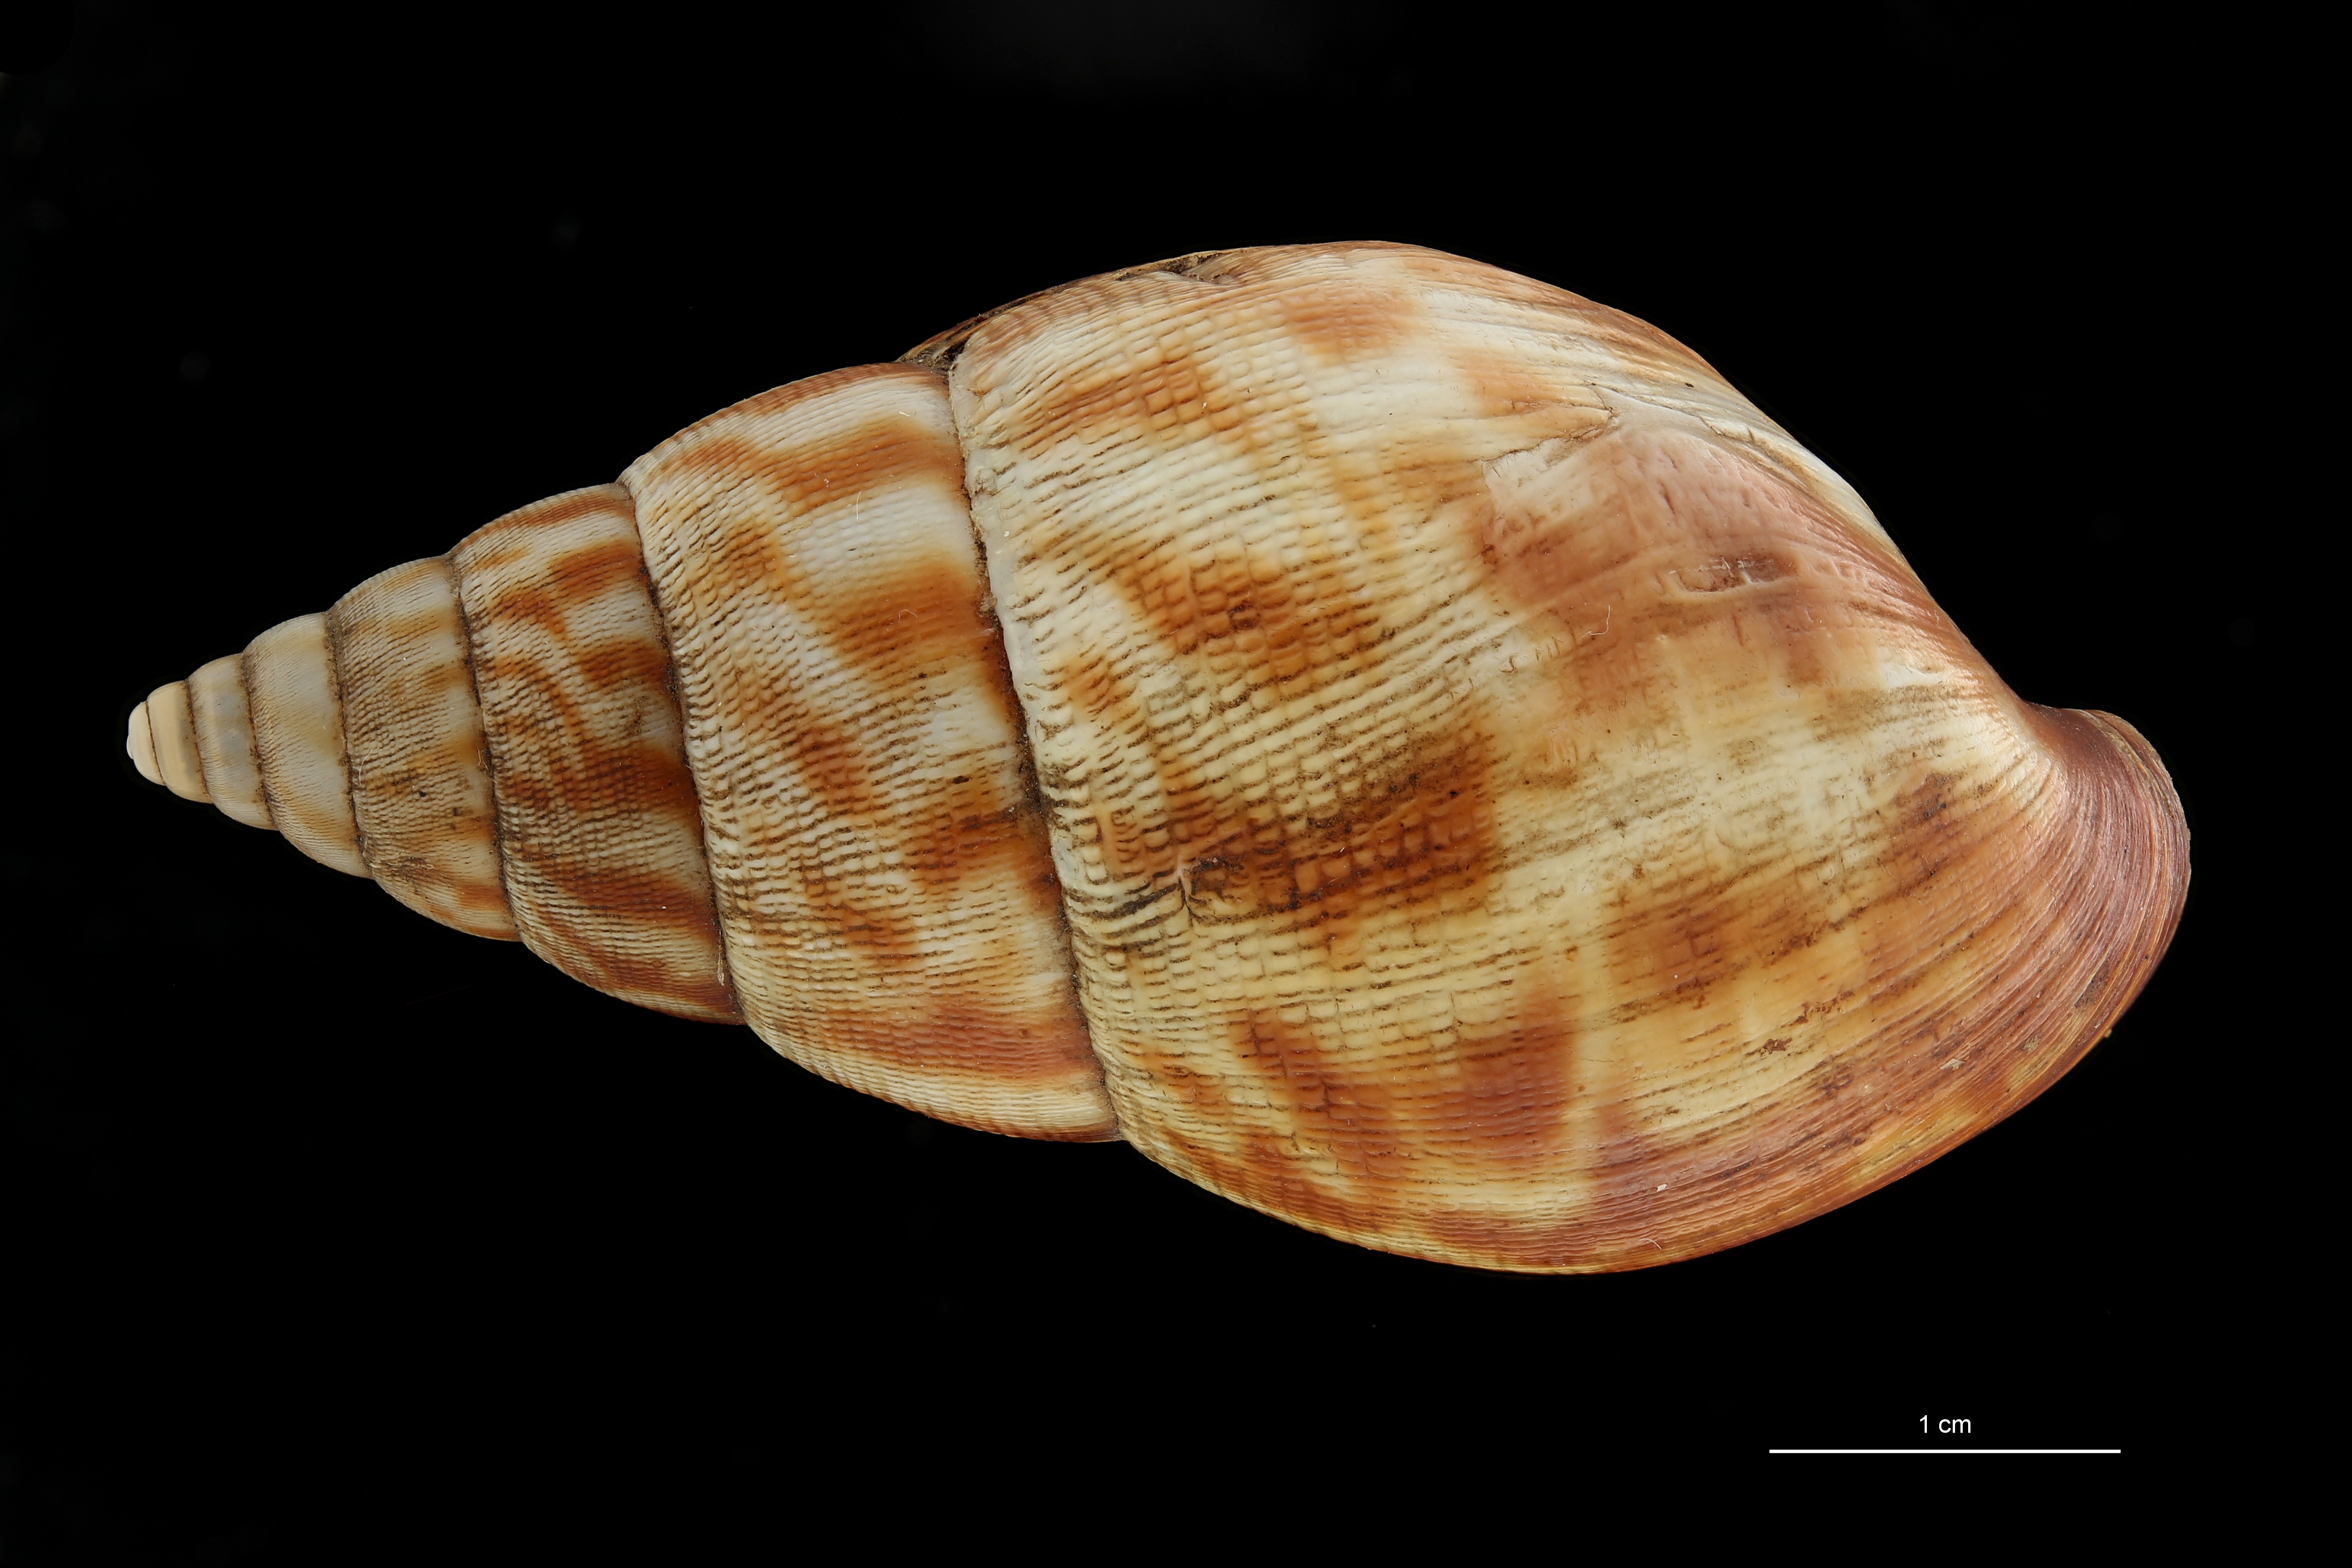 BE-RBINS-INV COTYPE MT 164 Achatina morrelli DORSAL ZS DMap Scaled.jpg